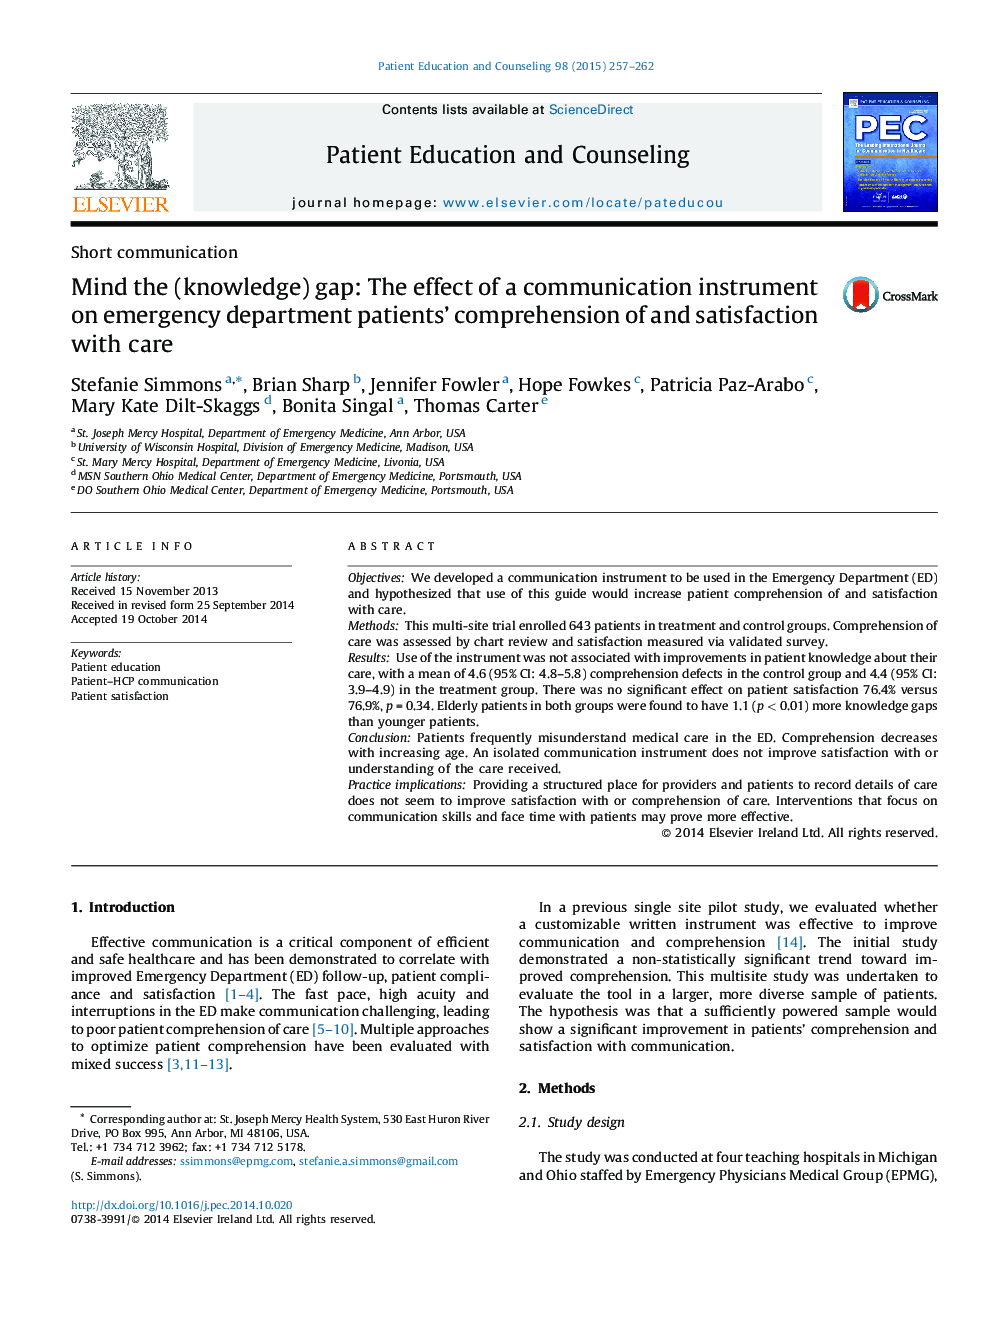 Mind the (knowledge) gap: The effect of a communication instrument on emergency department patients' comprehension of and satisfaction with care